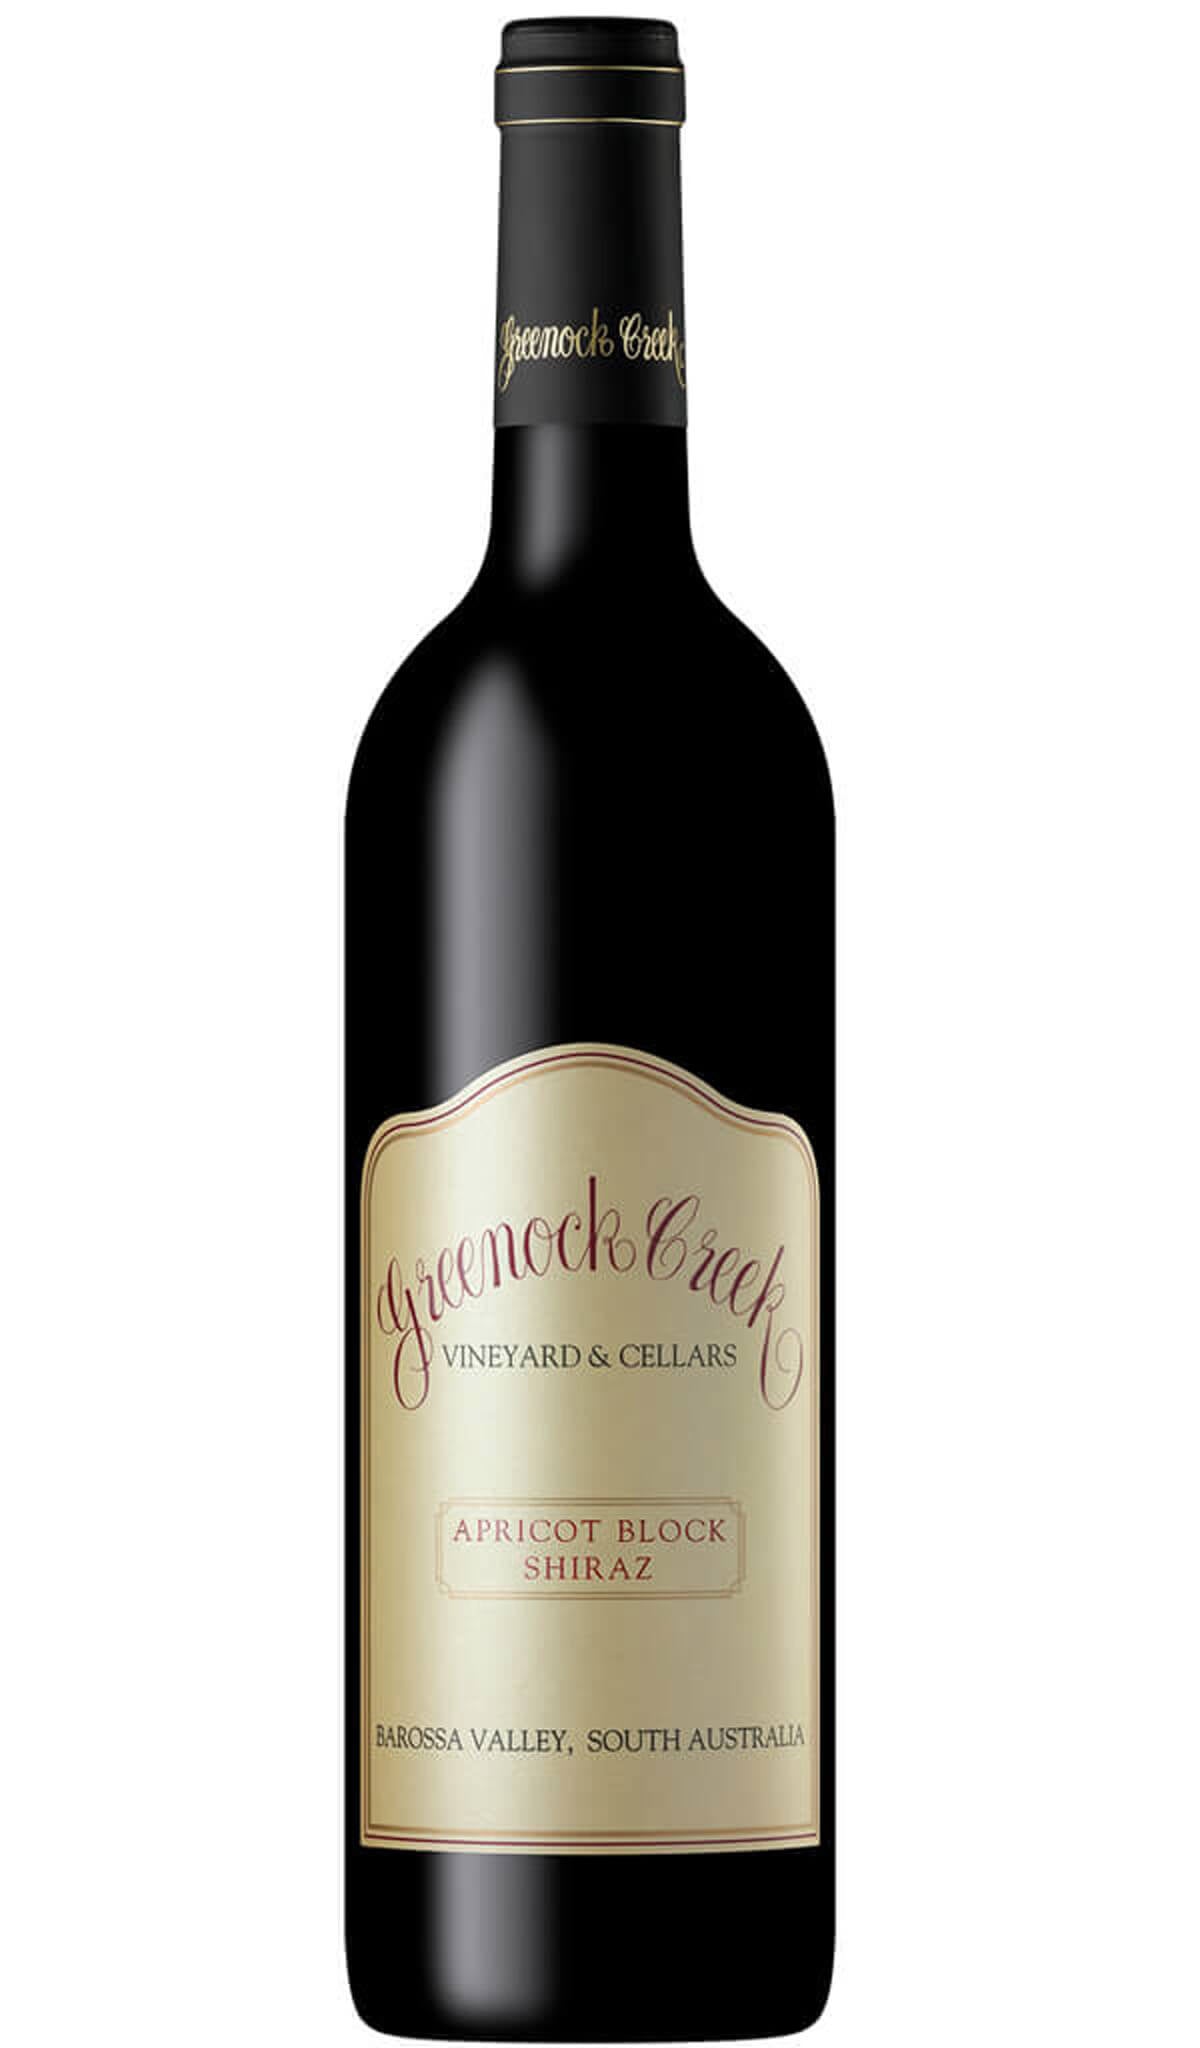 Find out more or buy Greenock Creek Apricot Block Shiraz 2021 (Barossa Valley) online at Wine Sellers Direct - Australia’s independent liquor specialists.